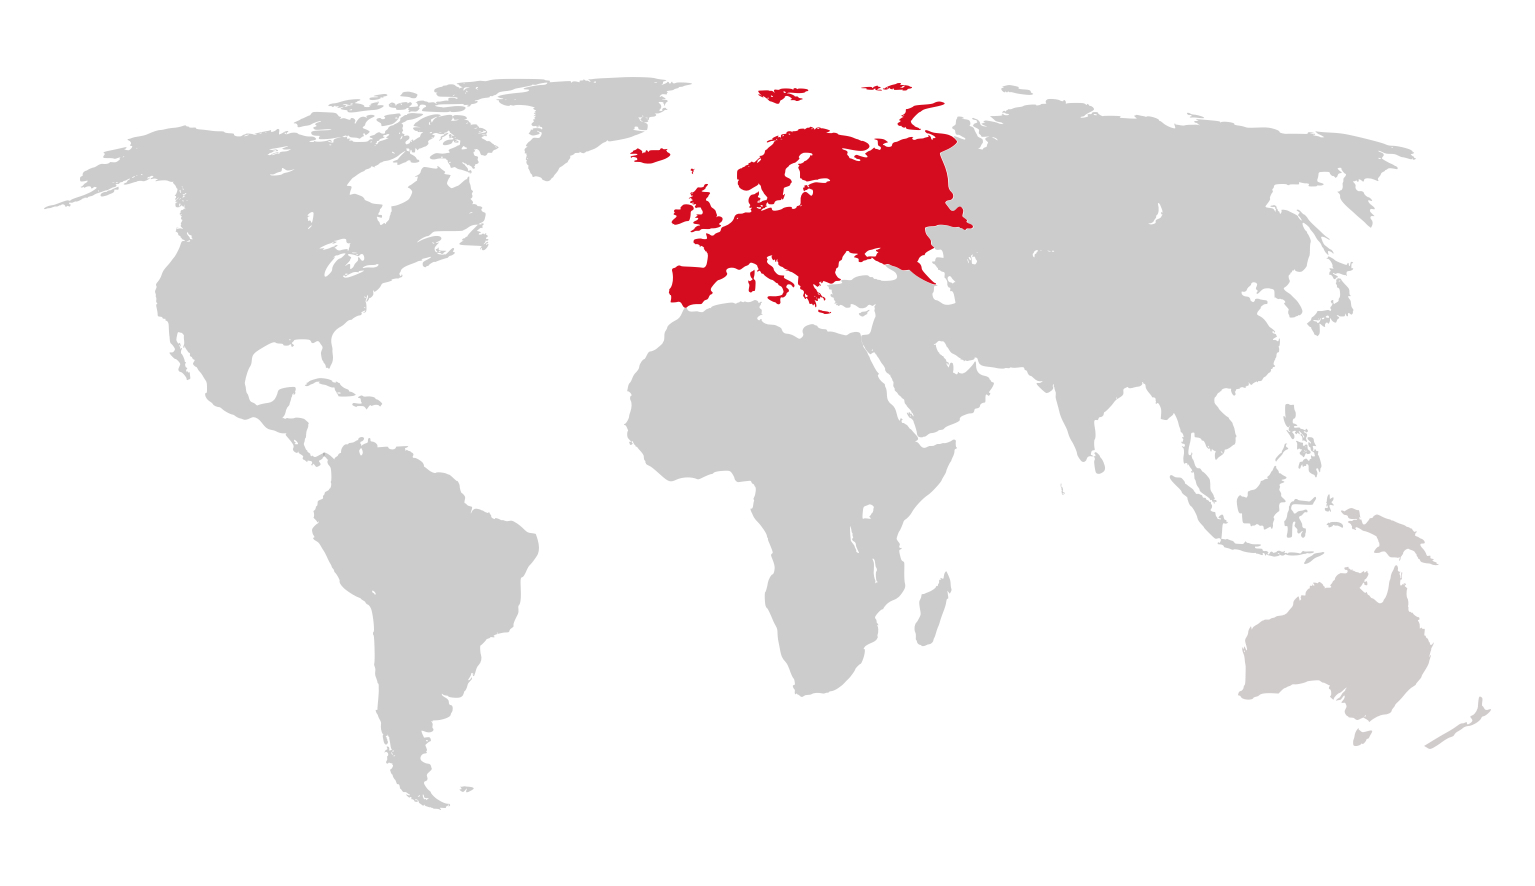 World map with Europe highlighted